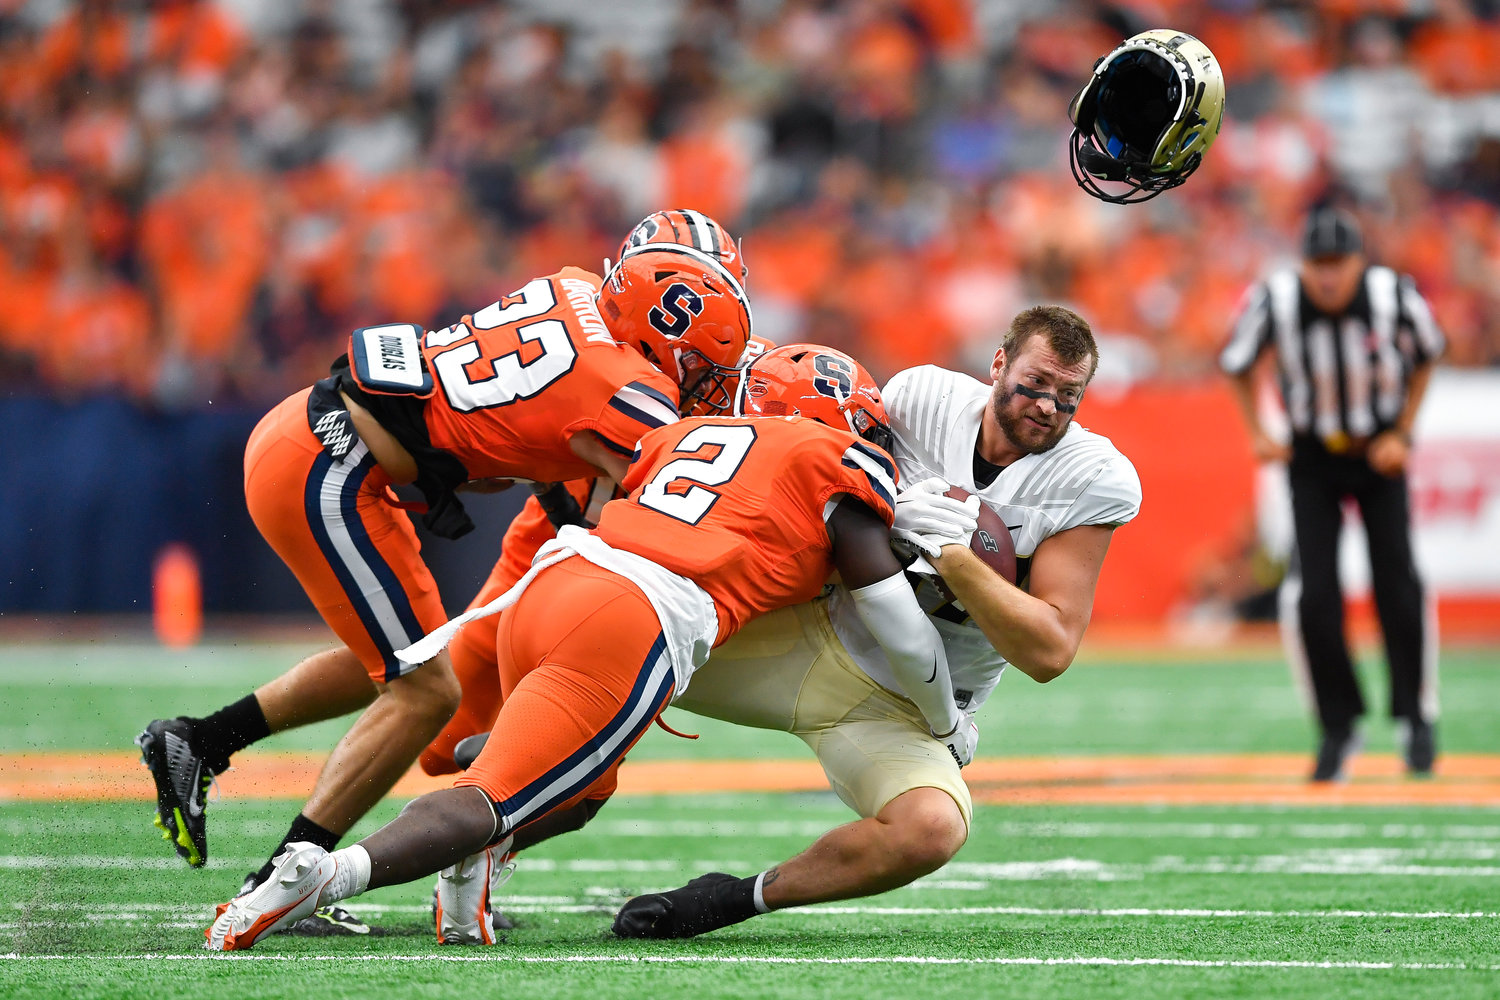 Purdue tight end Payne Durham, right, loses his helmet while being tackled by Syracuse linebacker Marlowe Wax (2) and defensive back Justin Barron (23) during the first half of an NCAA college football game in Syracuse, N.Y., Saturday, Sept. 17, 2022.